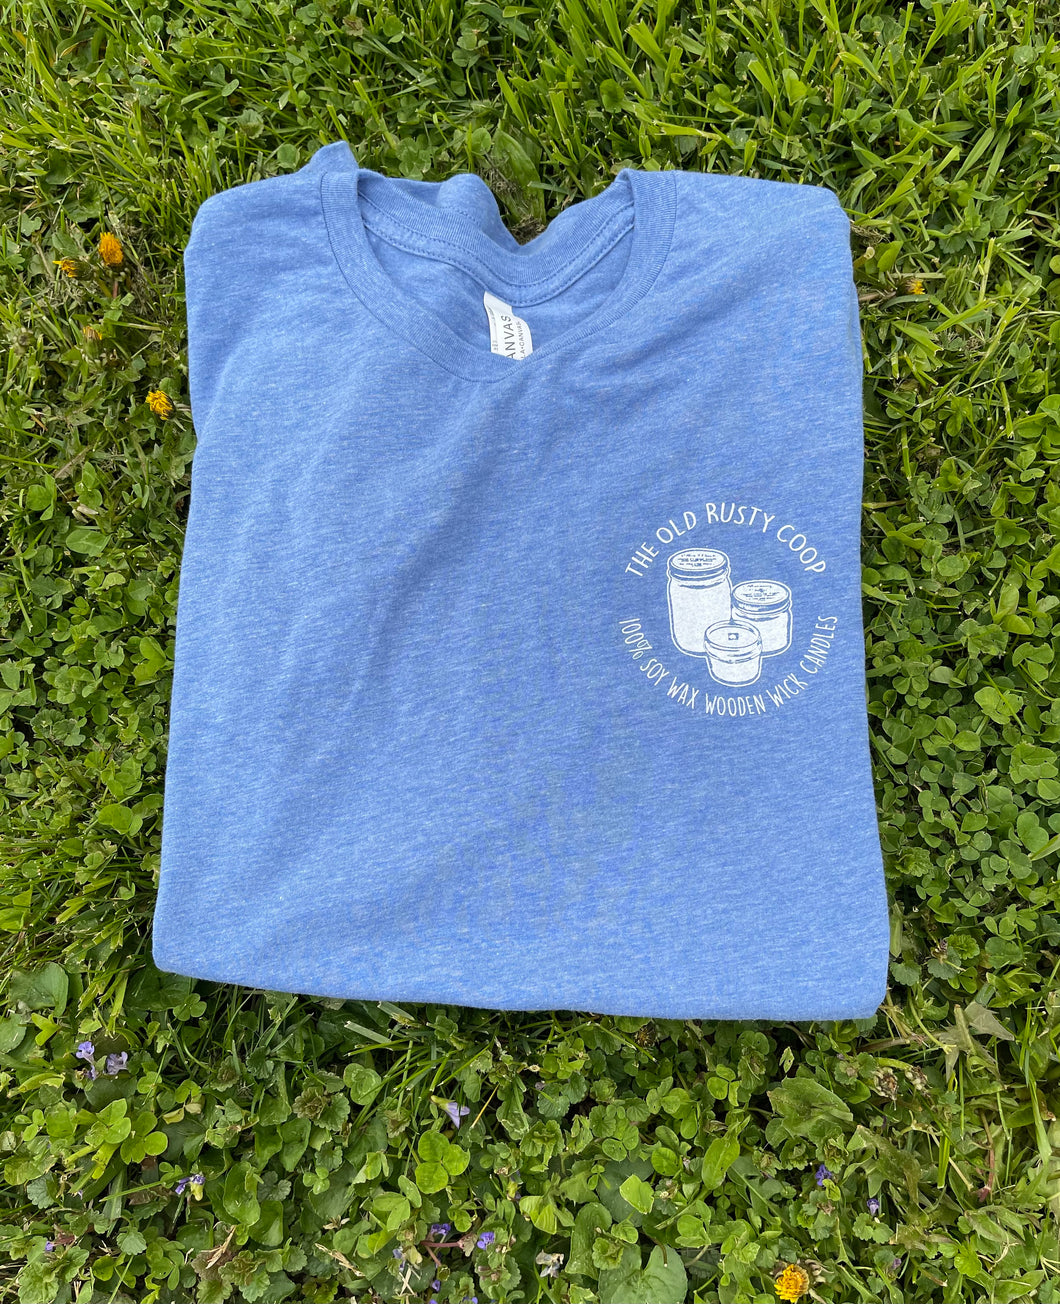 Super Soft Short Sleeve Blue The Old Rusty Coop T-shirt